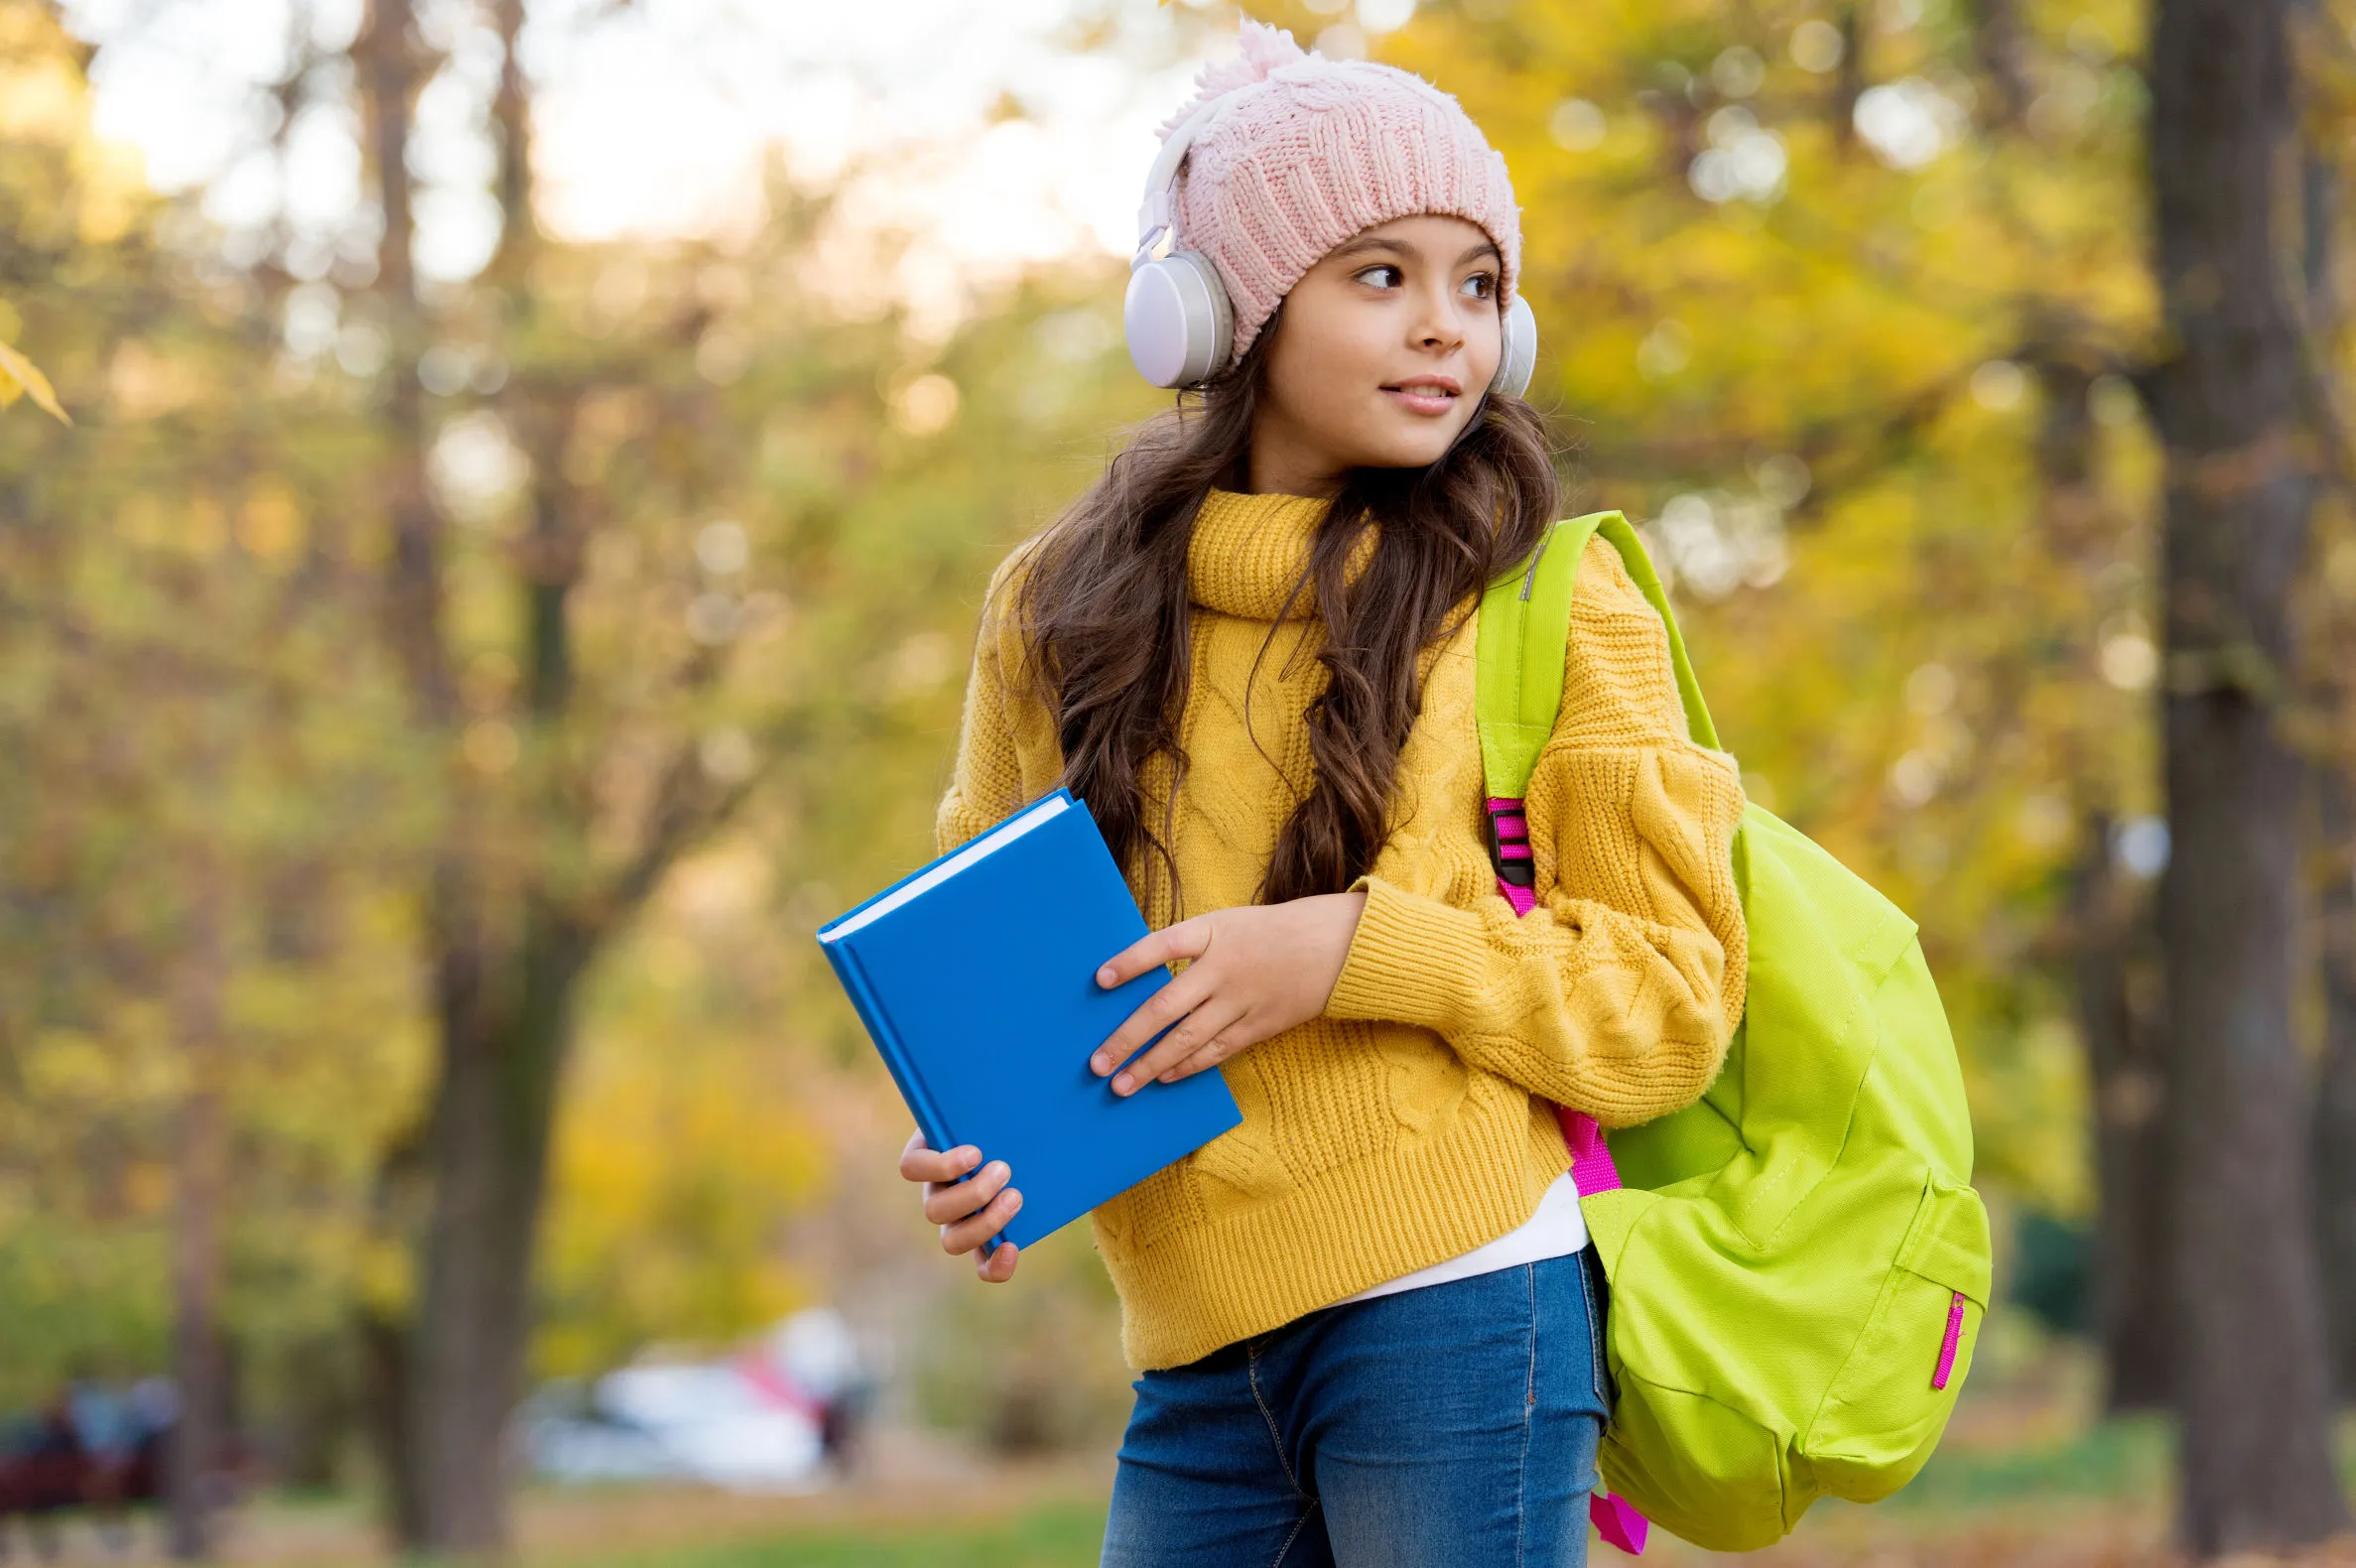 A young girl with brown hair in a yellow sweater holding a blue book. She is tanding in front of trees.